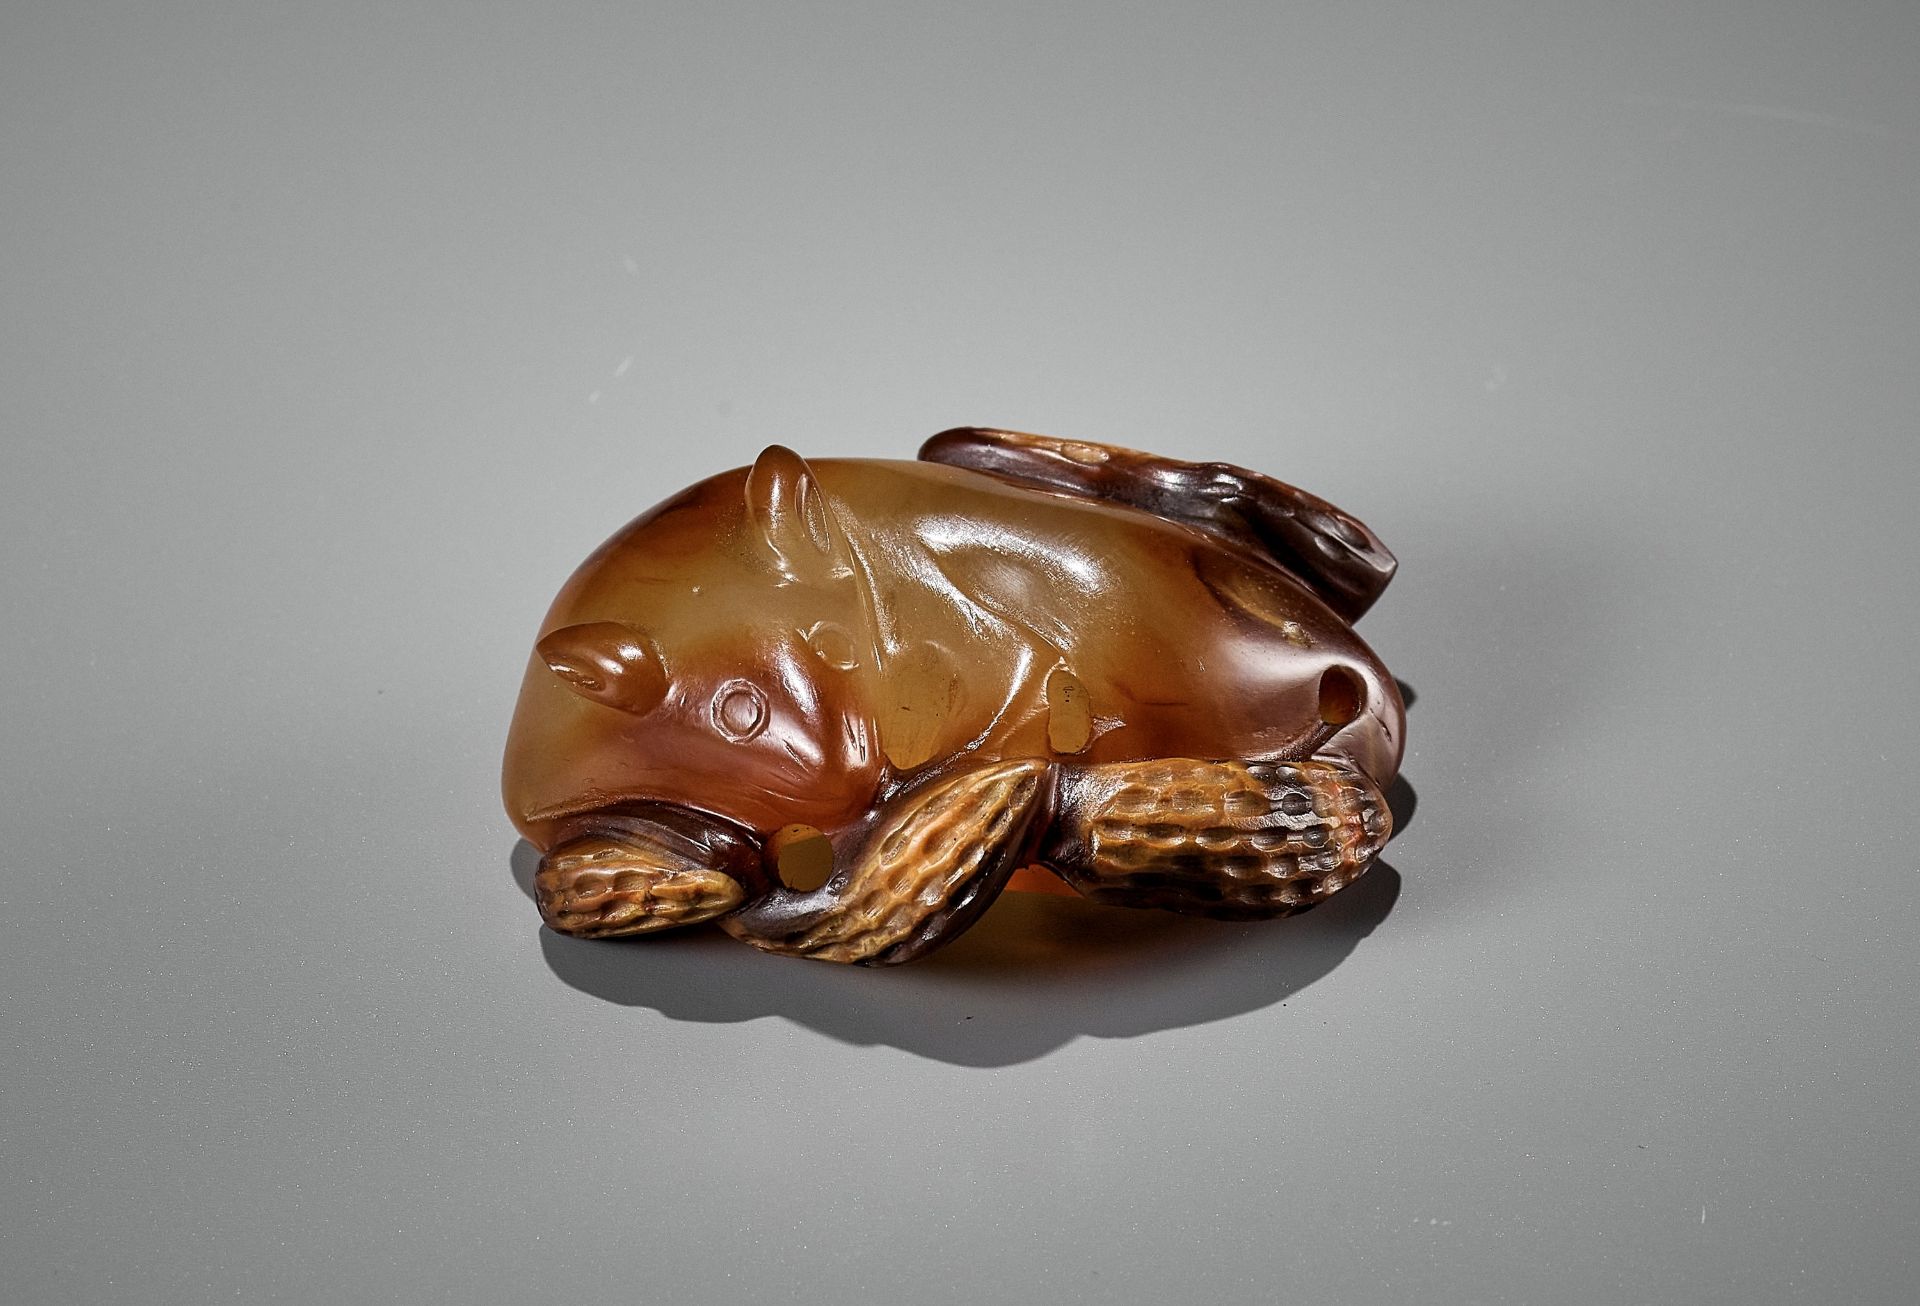 AN AGATE PENDANT OF A SQUIRREL WITH PEANUTS, 18TH-19TH CENTURY